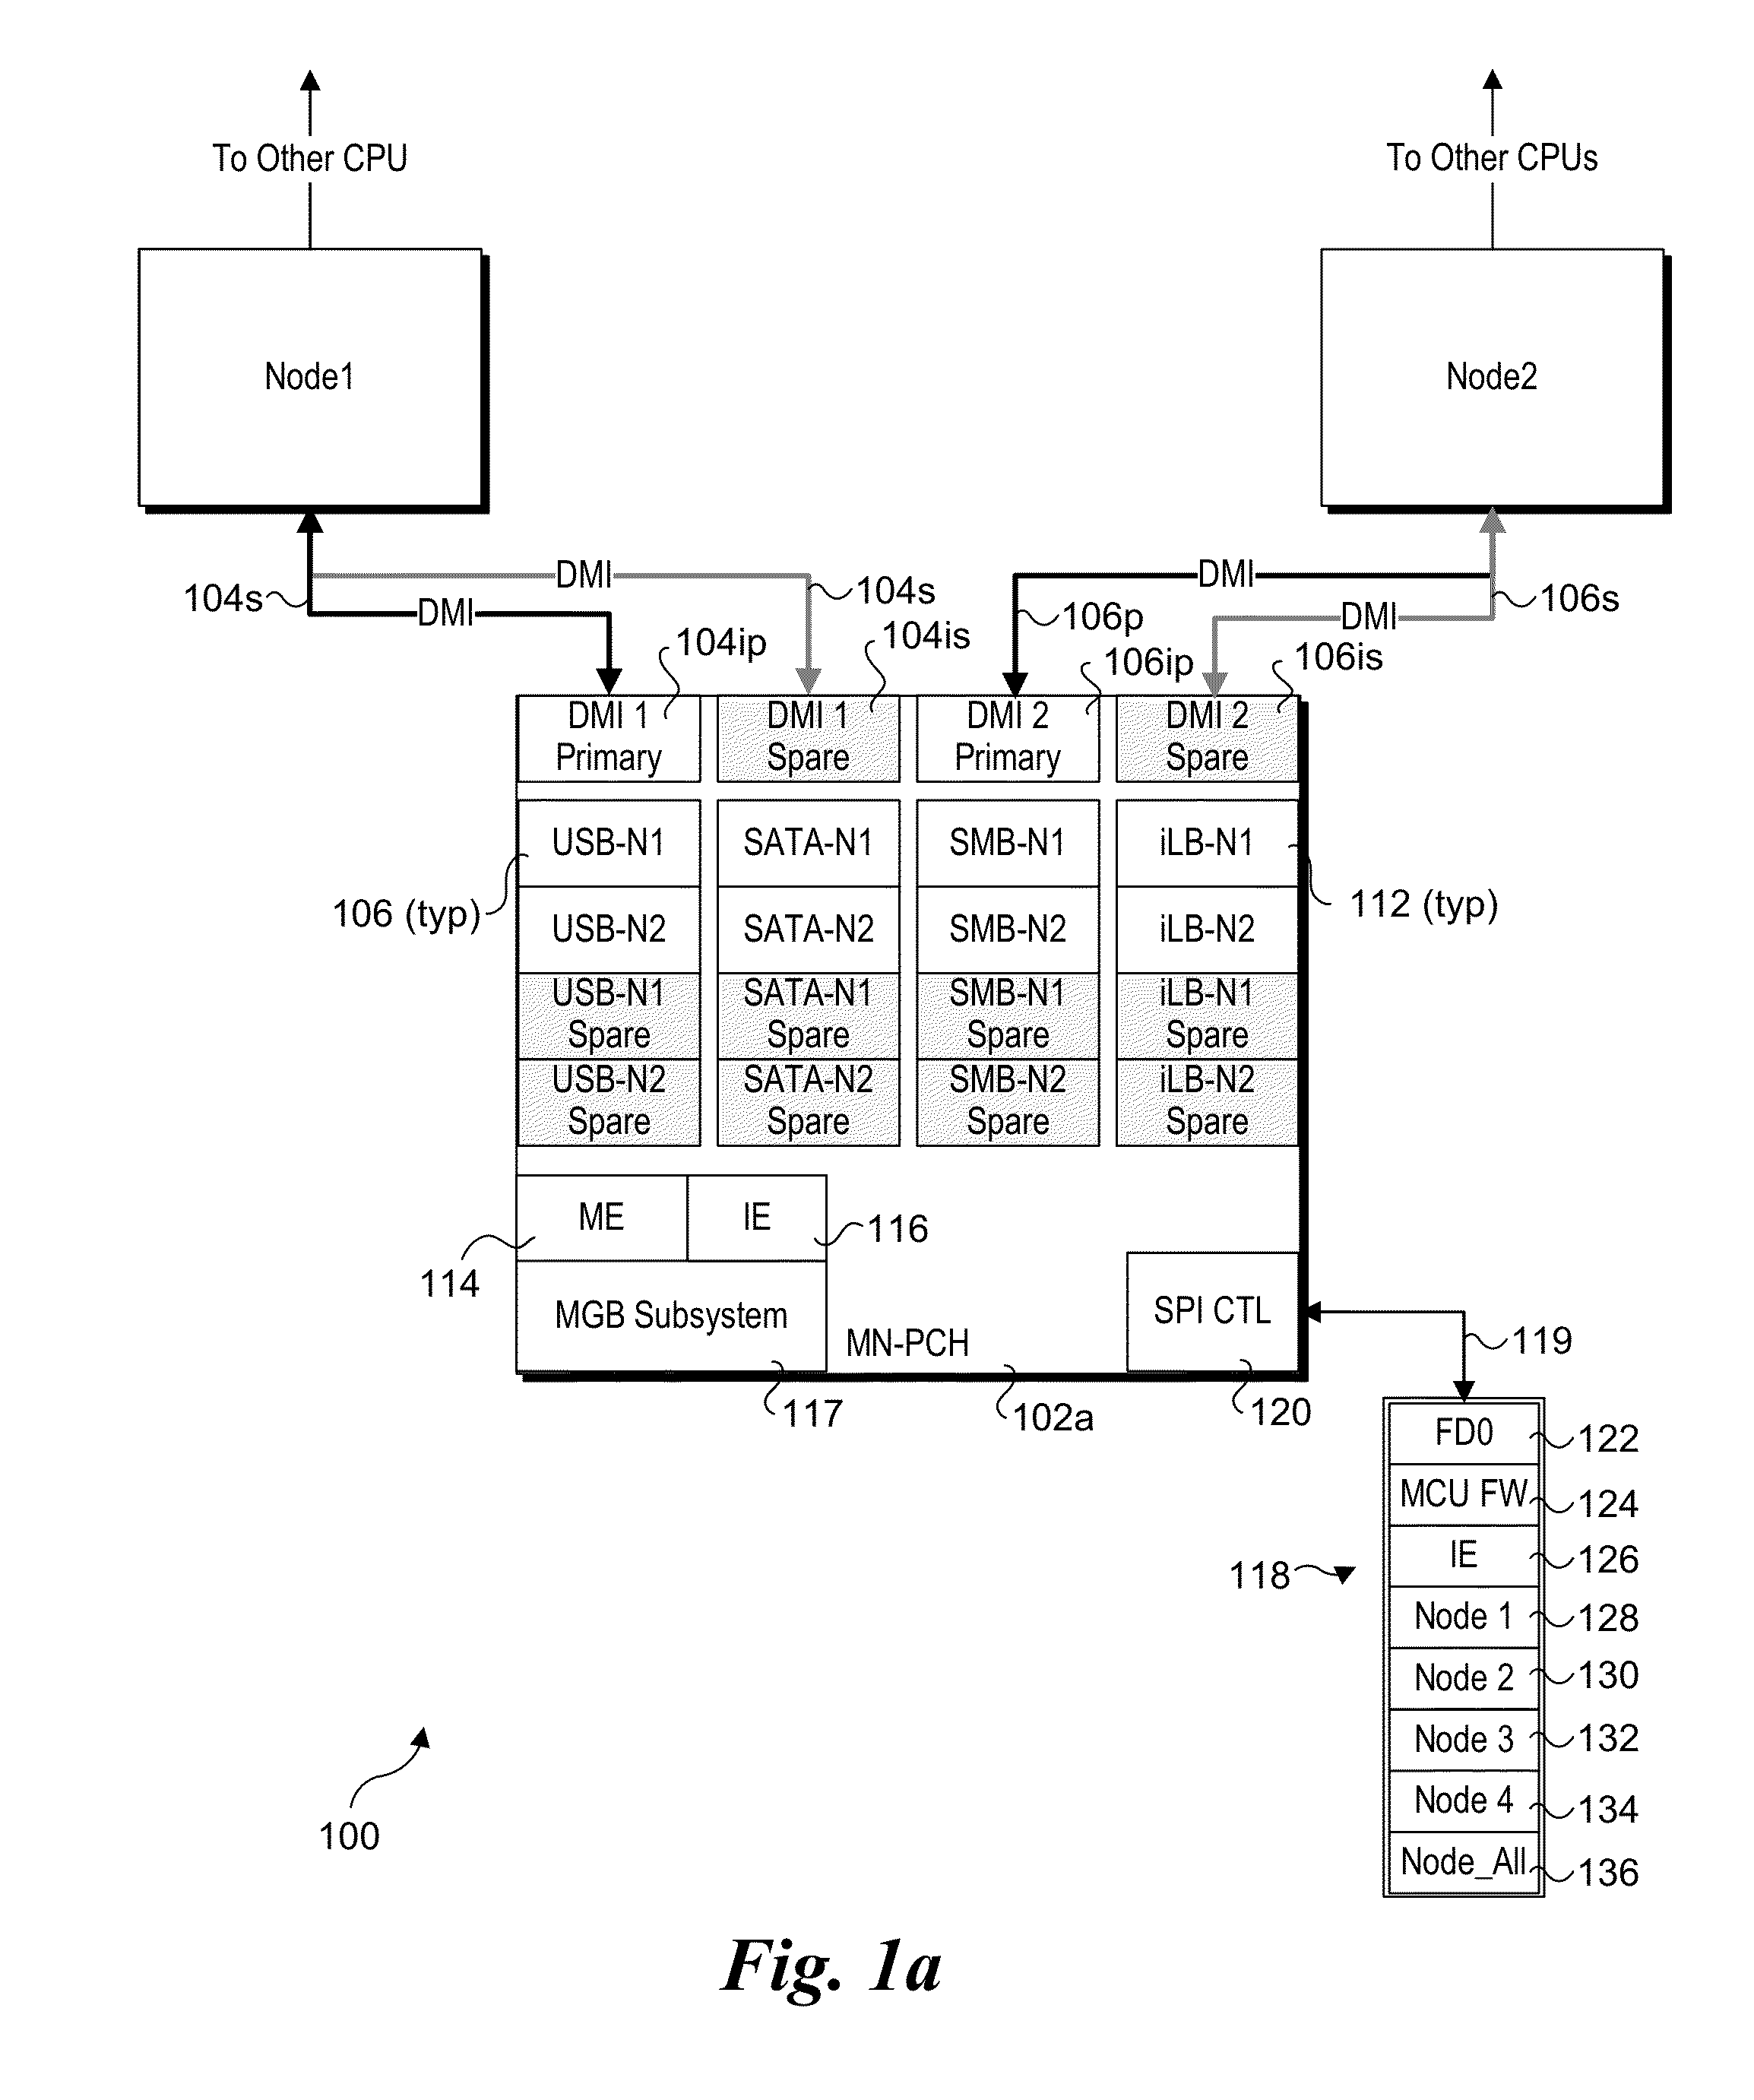 Method and apparatus for dynamic node healing in a multi-node environment